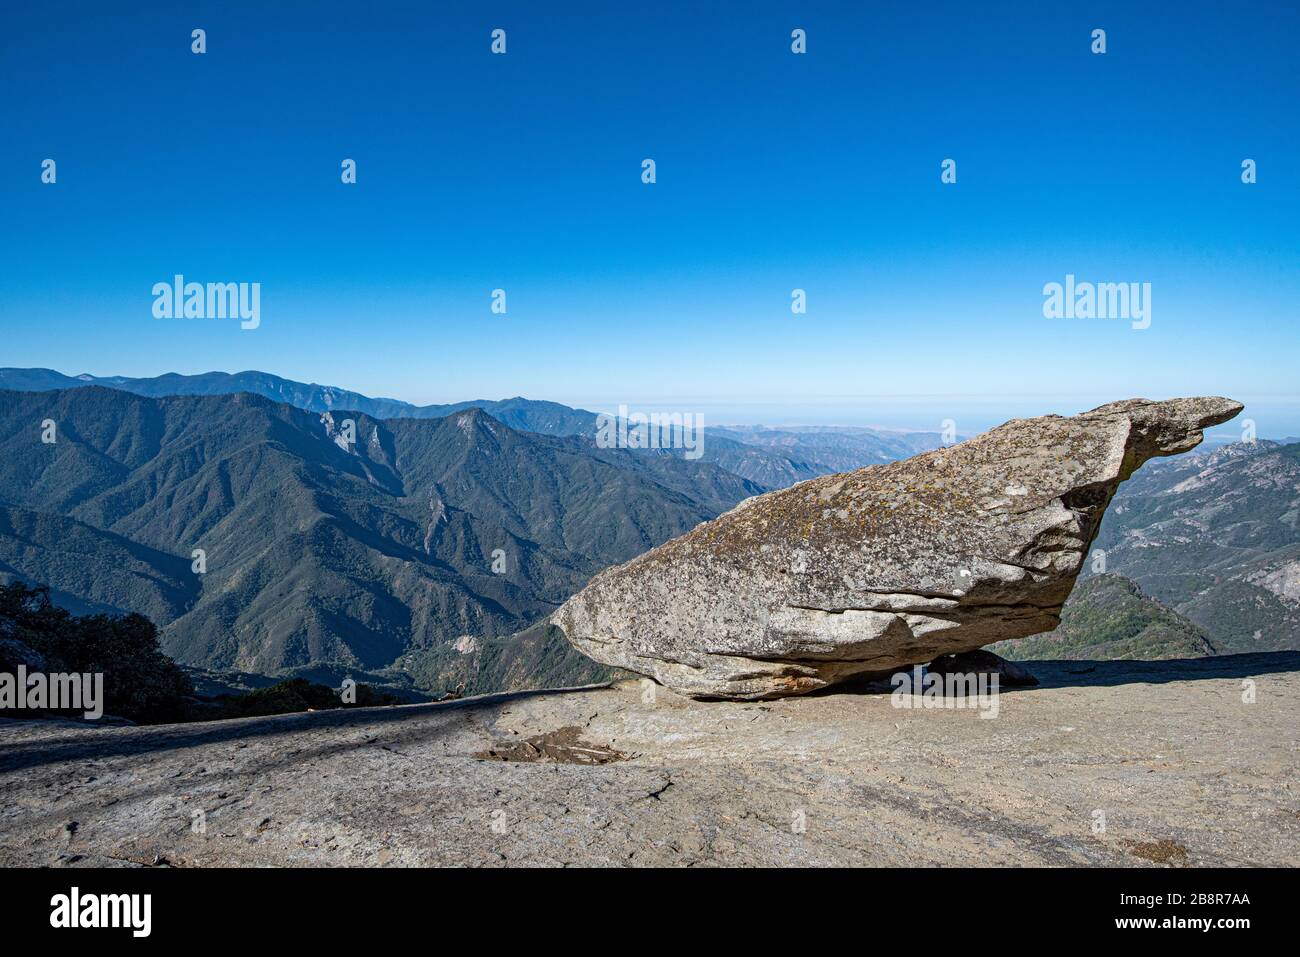 Hangin Rock stands precariously over the Kaweah Valley in Sequoia National Park. Stock Photo